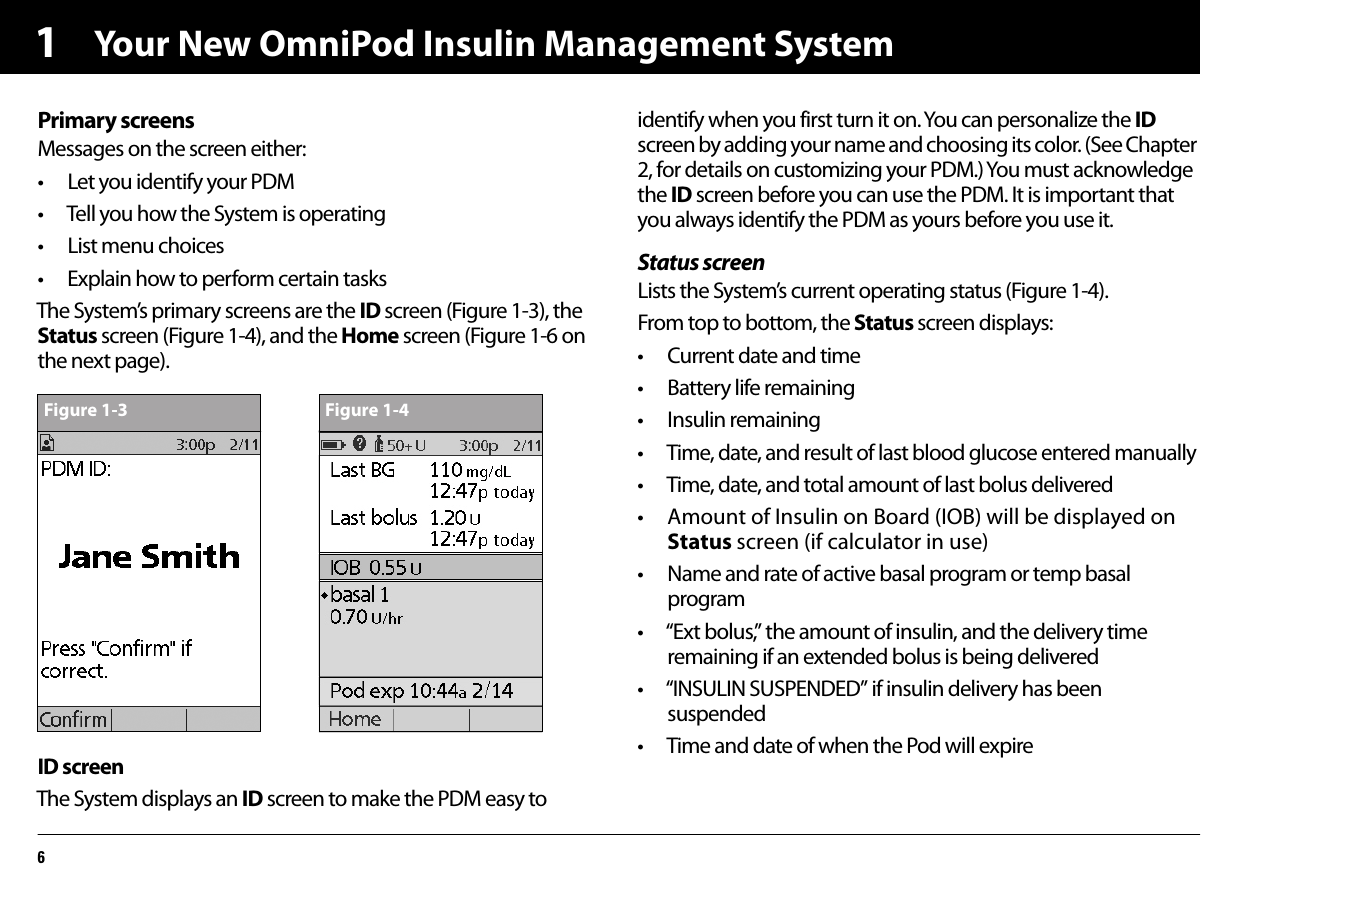 Your New OmniPod Insulin Management System61Primary screensMessages on the screen either:• Let you identify your PDM• Tell you how the System is operating• List menu choices• Explain how to perform certain tasksThe System’s primary screens are the ID screen (Figure 1-3), the Status screen (Figure 1-4), and the Home screen (Figure 1-6 on the next page).ID screenThe System displays an ID screen to make the PDM easy to identify when you first turn it on. You can personalize the ID screen by adding your name and choosing its color. (See Chapter 2, for details on customizing your PDM.) You must acknowledge the ID screen before you can use the PDM. It is important that you always identify the PDM as yours before you use it.Status screenLists the System’s current operating status (Figure 1-4).From top to bottom, the Status screen displays:• Current date and time• Battery life remaining• Insulin remaining• Time, date, and result of last blood glucose entered manually• Time, date, and total amount of last bolus delivered• Amount of Insulin on Board (IOB) will be displayed on Status screen (if calculator in use) • Name and rate of active basal program or temp basal program • “Ext bolus,” the amount of insulin, and the delivery time remaining if an extended bolus is being delivered• “INSULIN SUSPENDED” if insulin delivery has been suspended • Time and date of when the Pod will expire  Figure 1-3 Figure 1-4